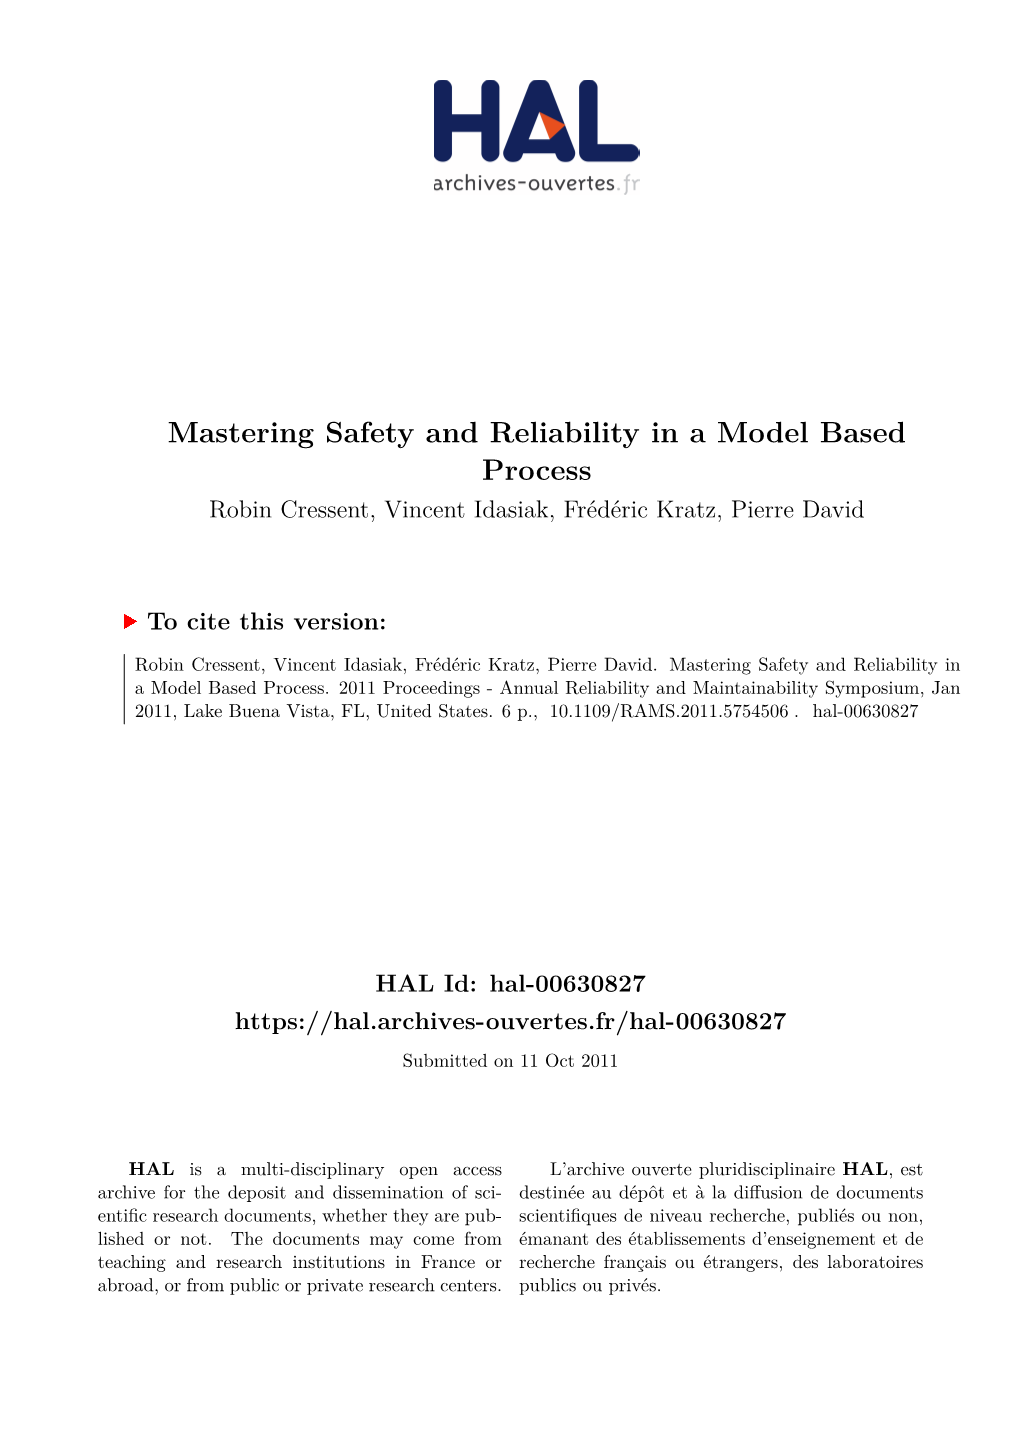 Mastering Safety and Reliability in a Model Based Process Robin Cressent, Vincent Idasiak, Frédéric Kratz, Pierre David